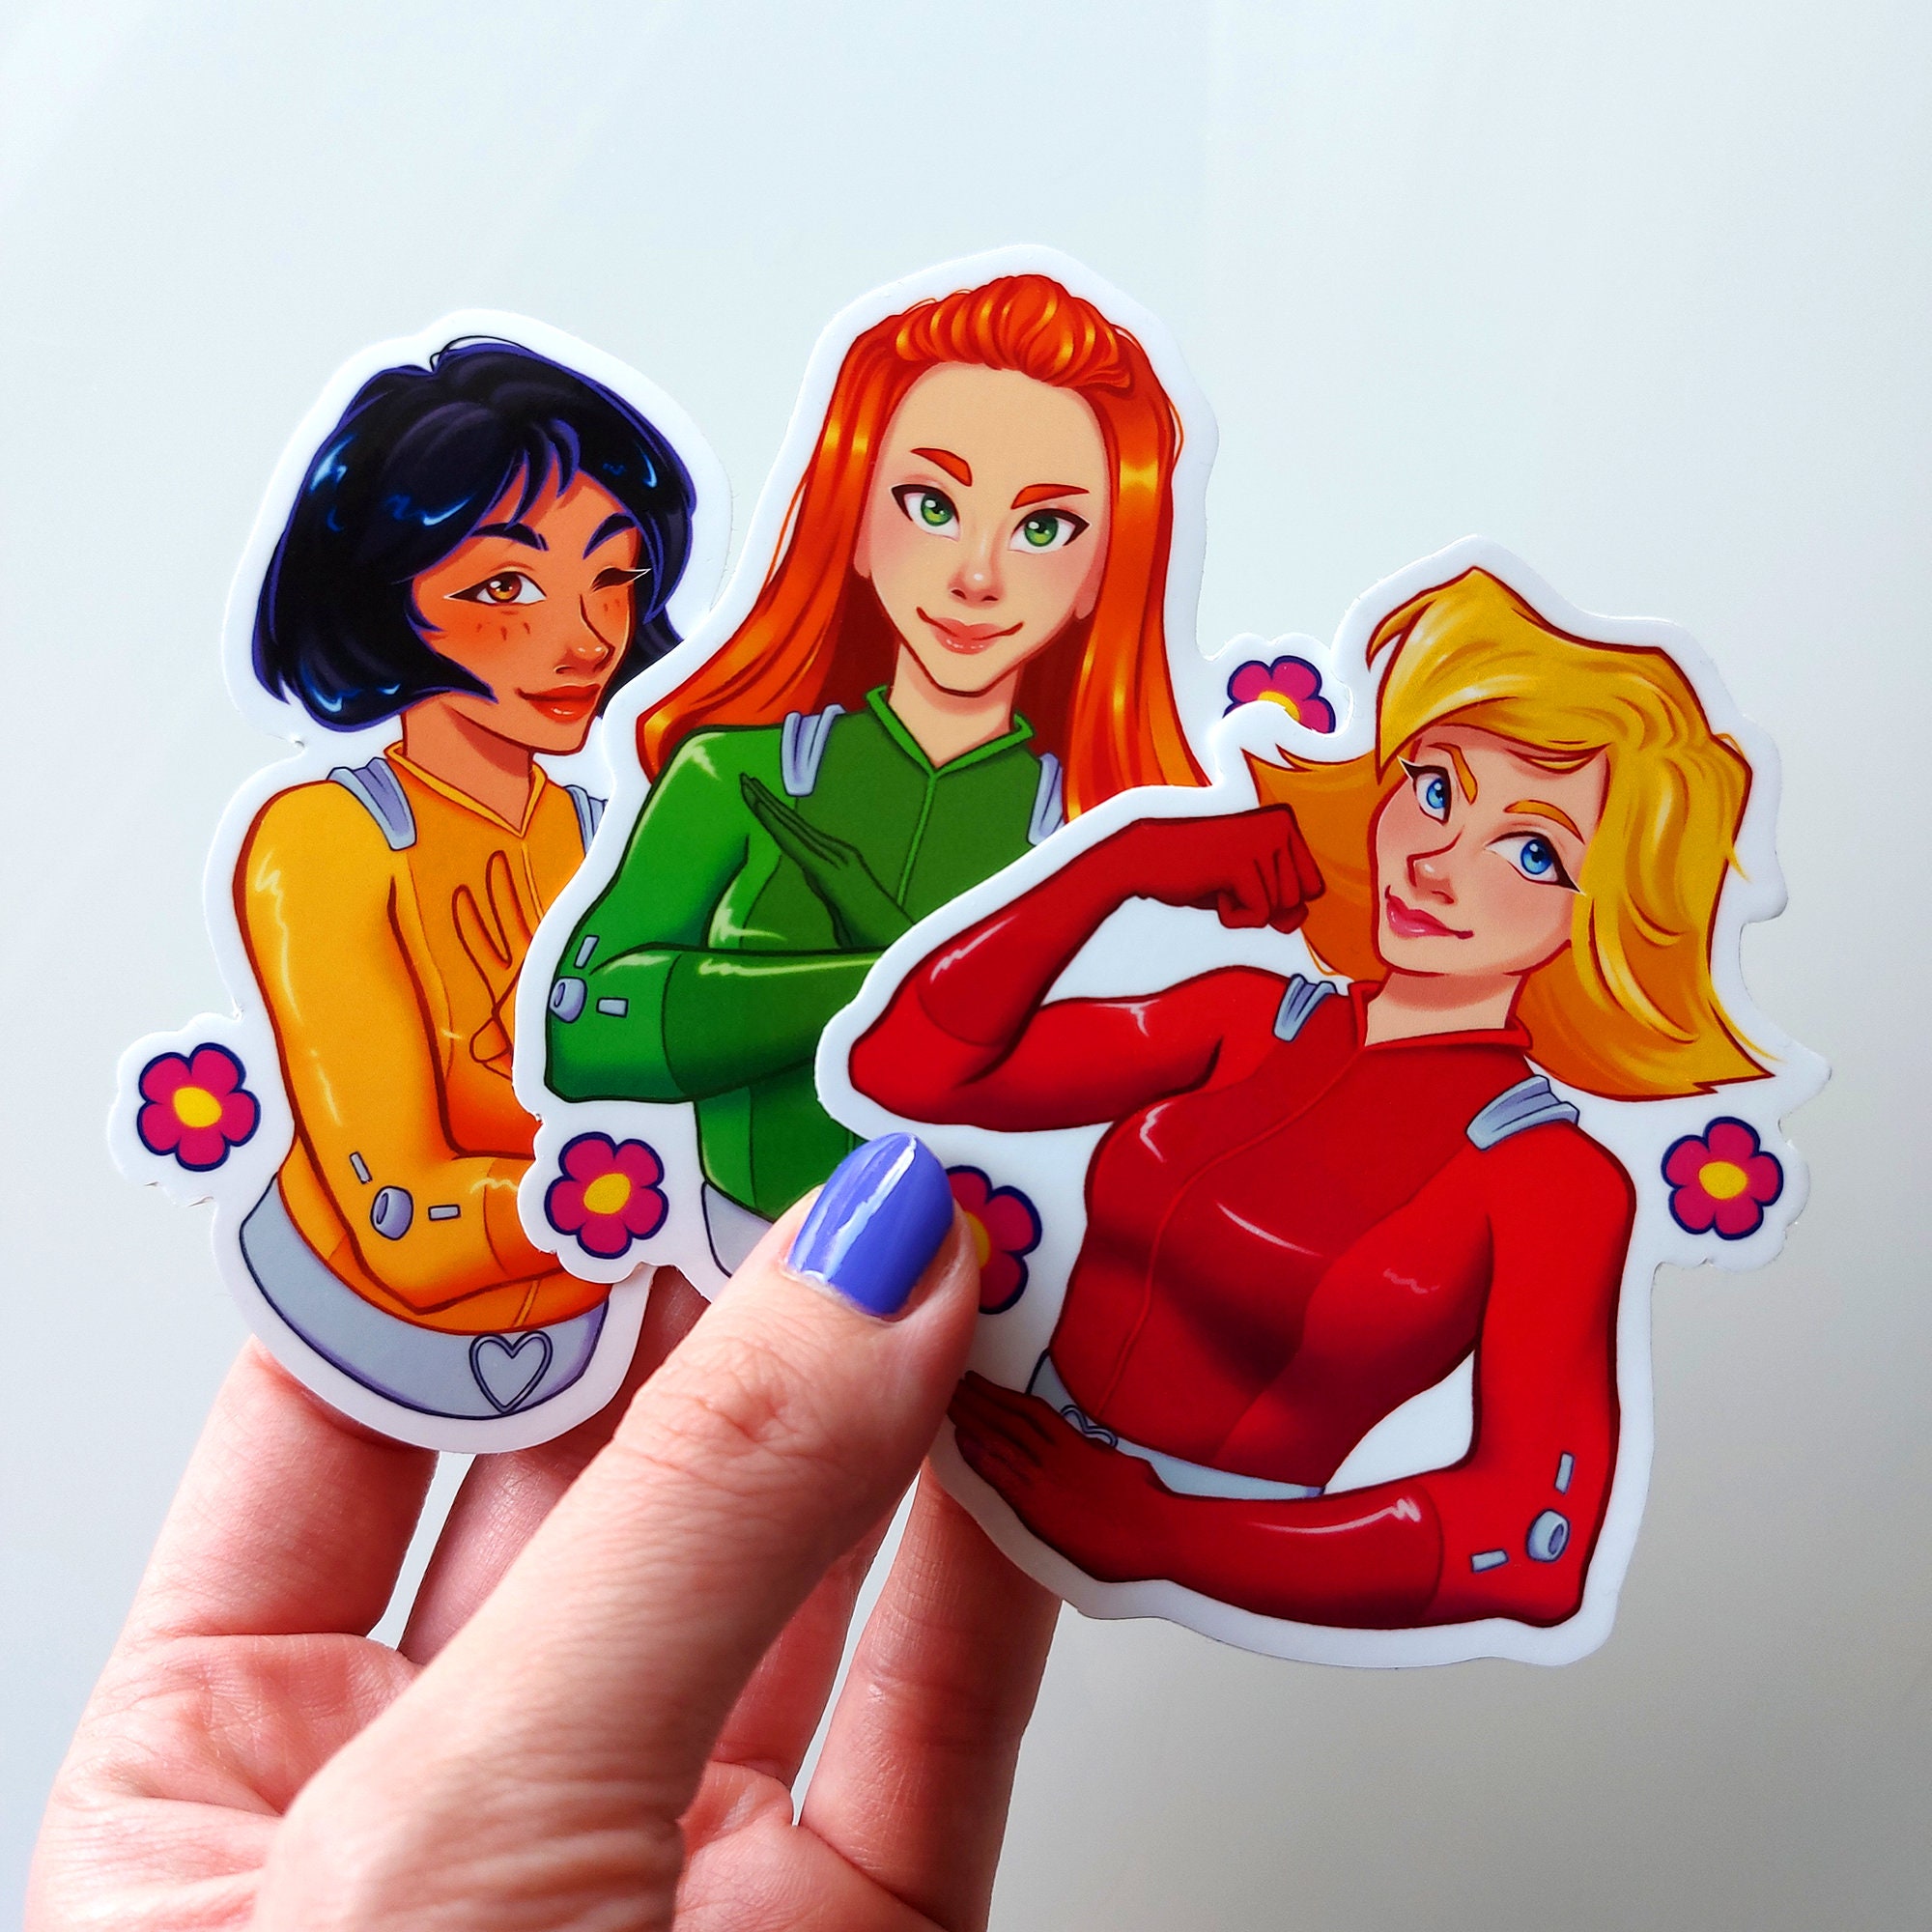 aj barasi recommends Alex From Totally Spies Having Sex